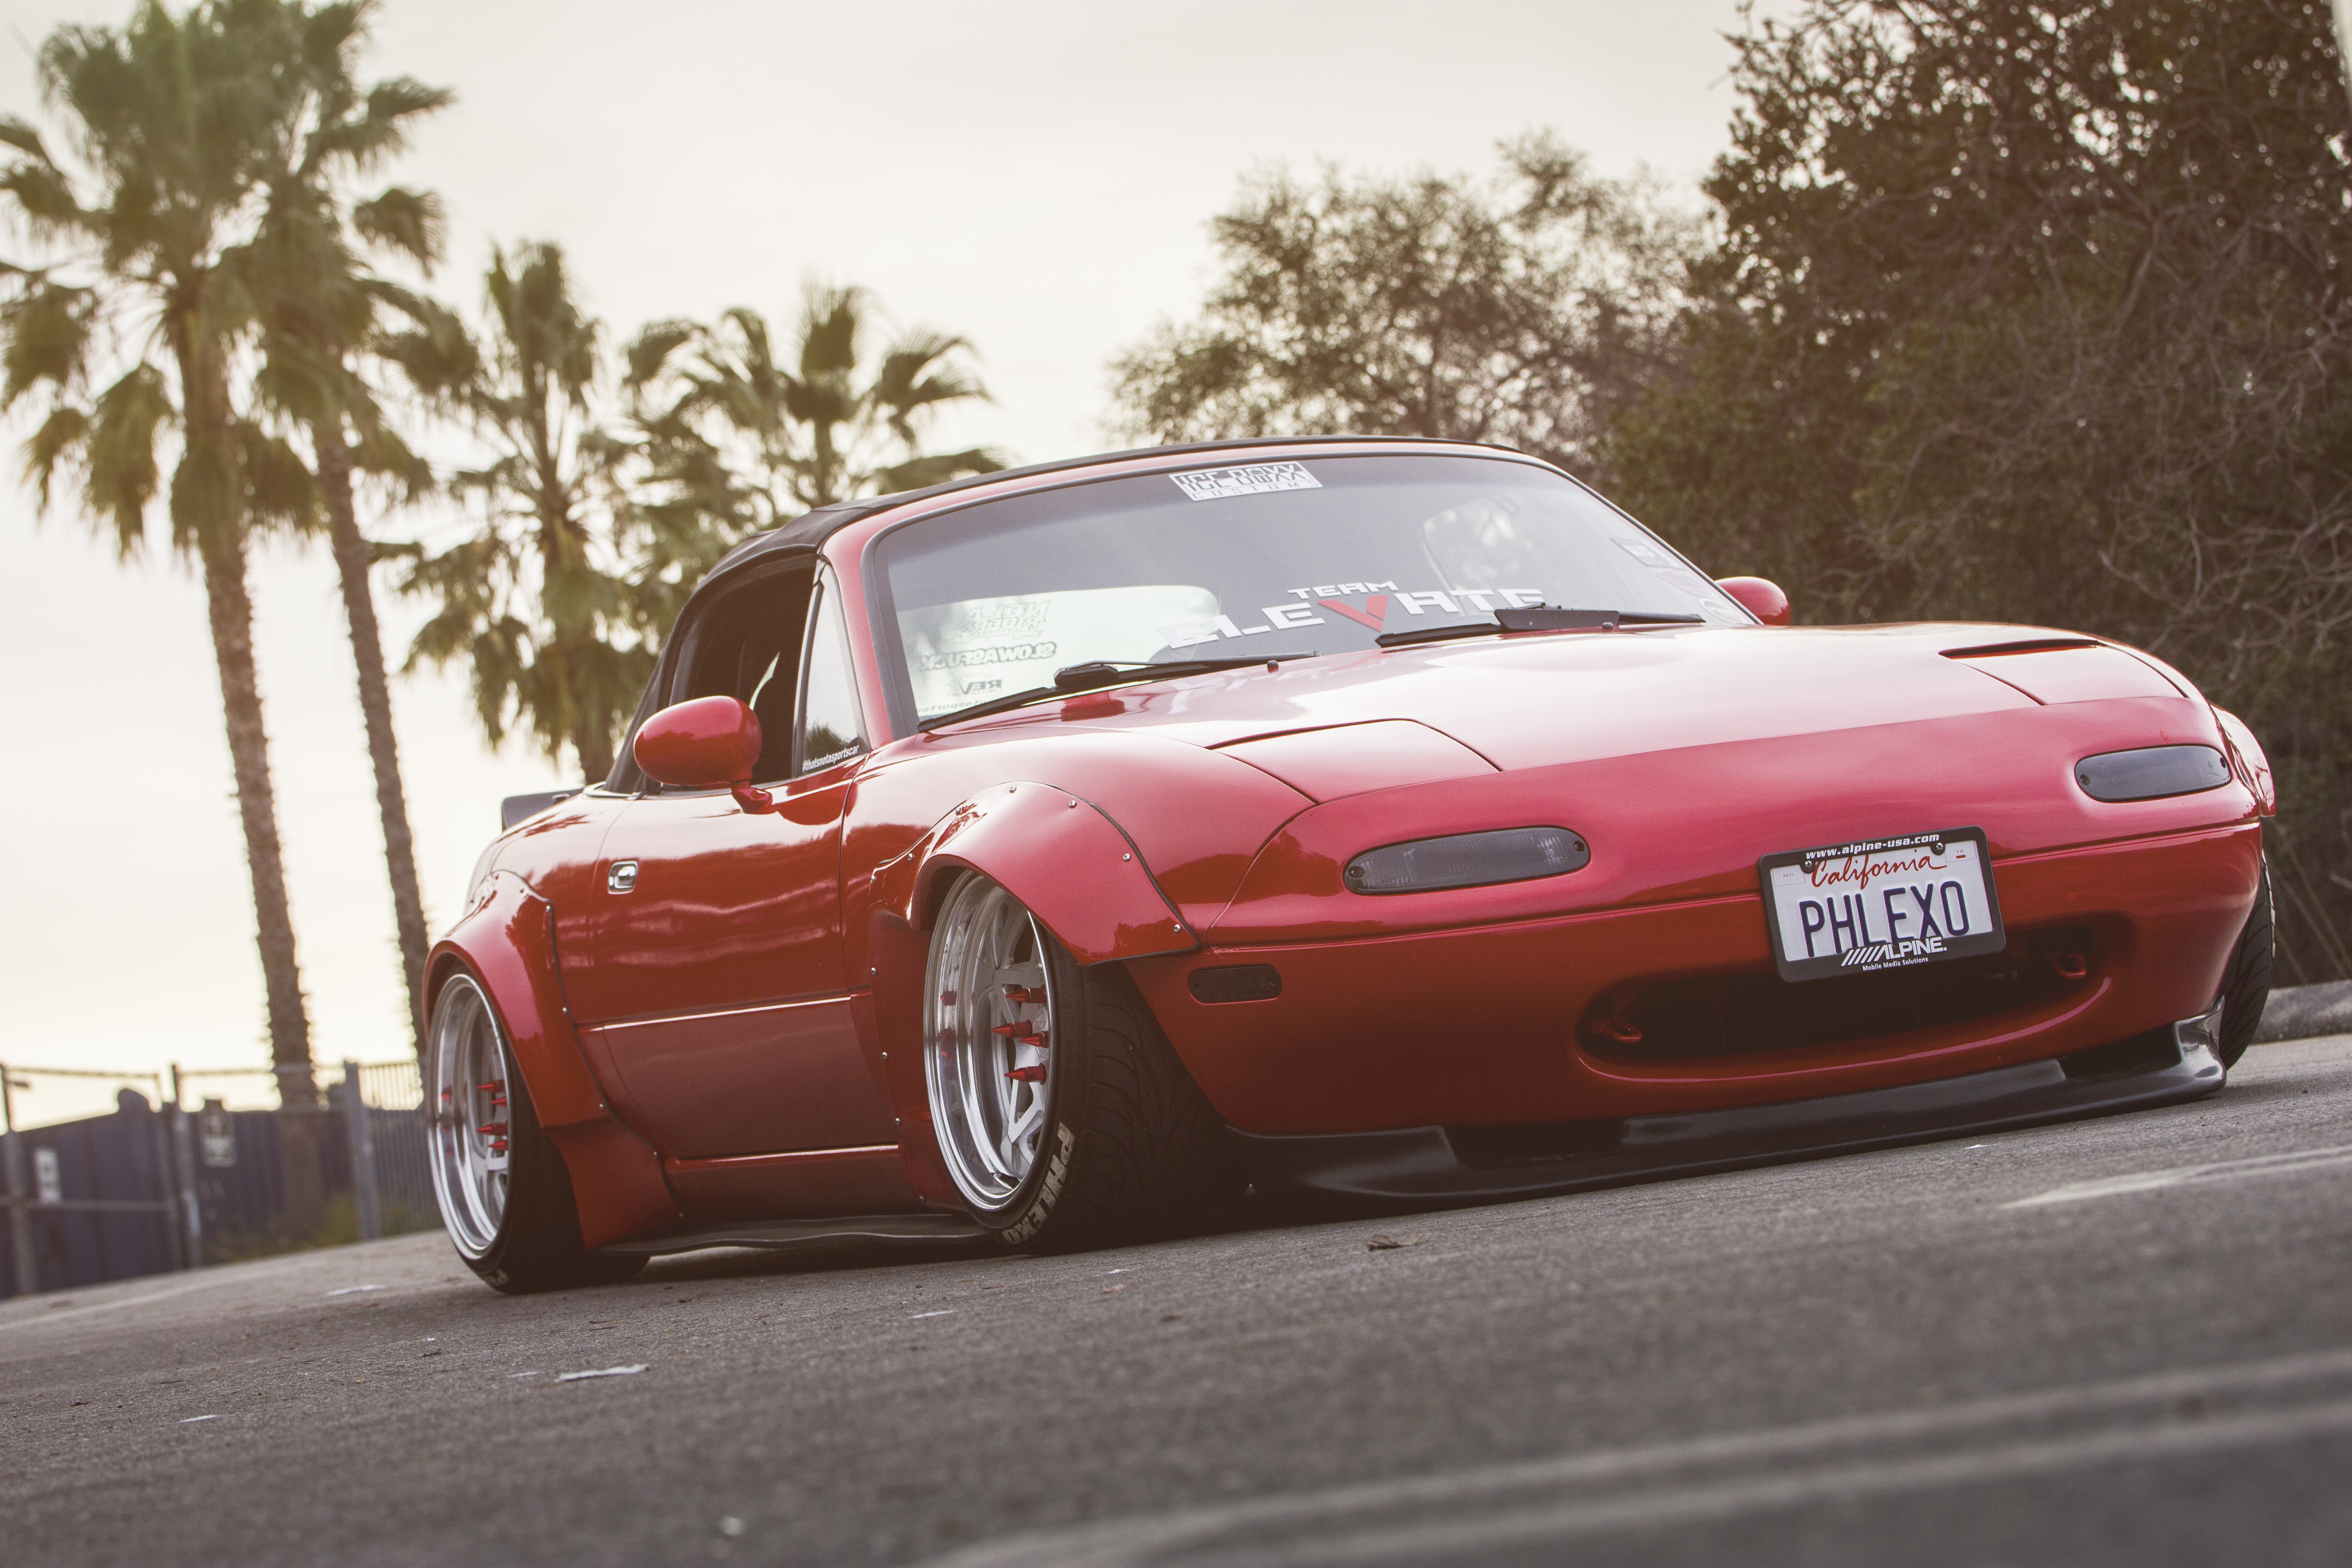 General 5184x3456 Mazda MX-5 widebody Rocket Bunny Mazda Los Angeles car red cars vehicle pop-up headlights frontal view stanced bodykit Japanese cars